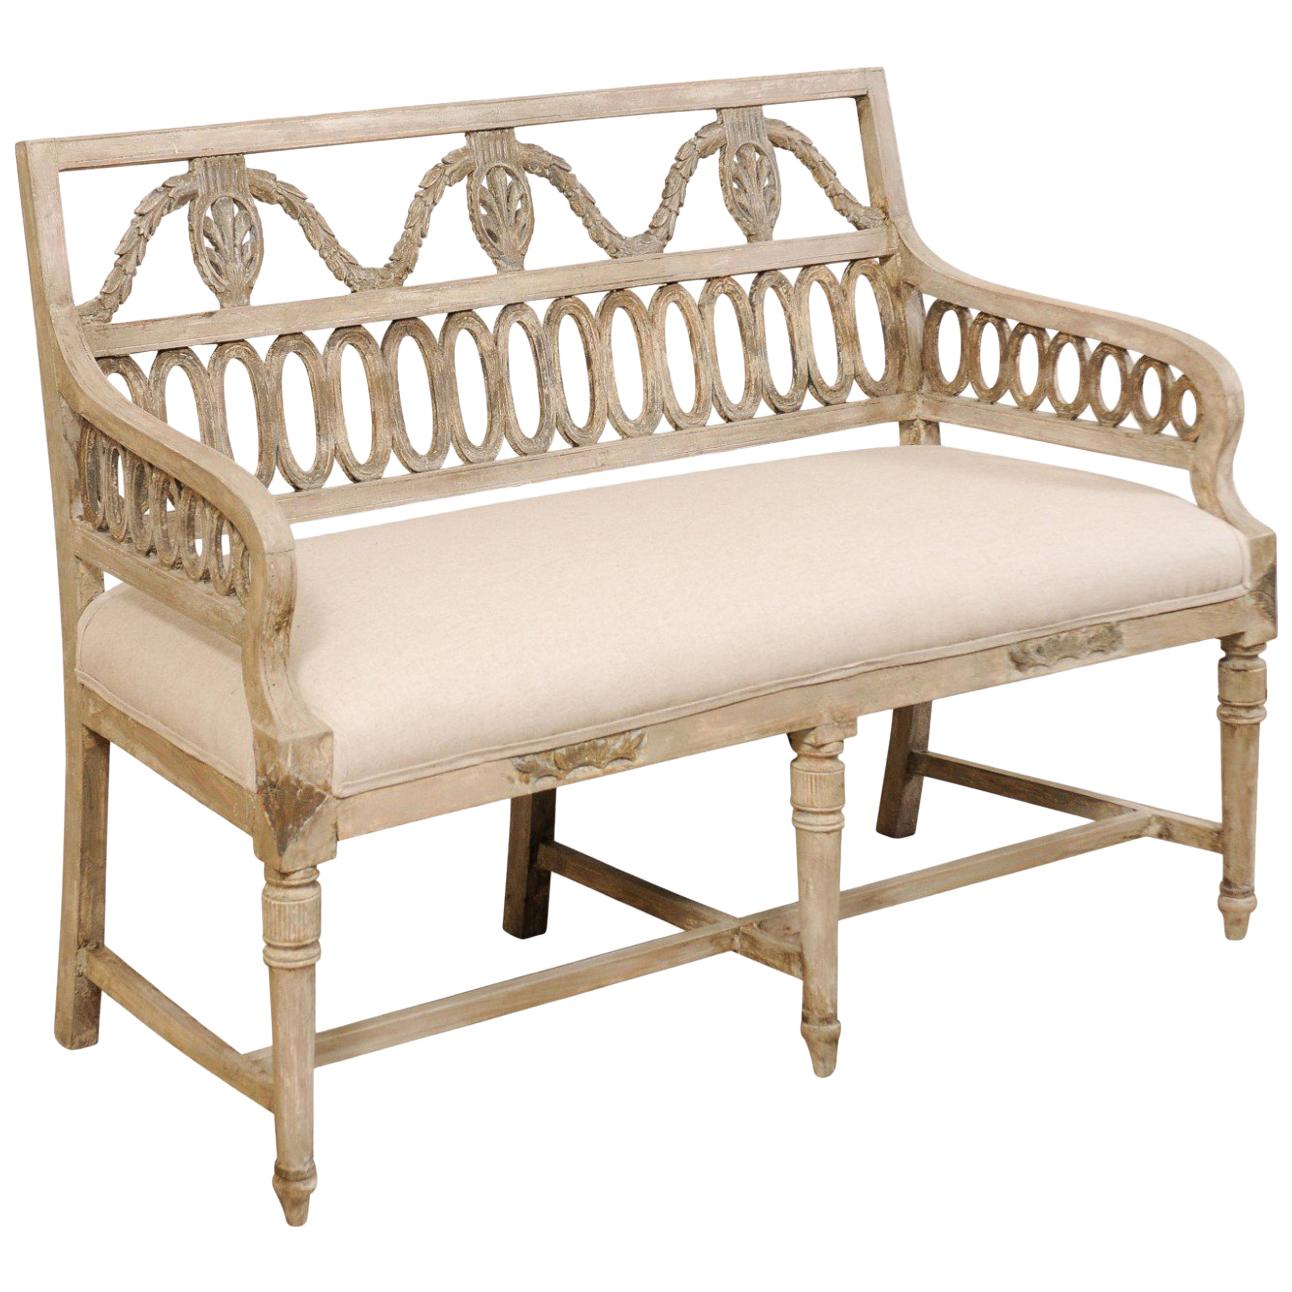 Swedish Period Late Gustavian Carved and Painted Wood Sofa Bench